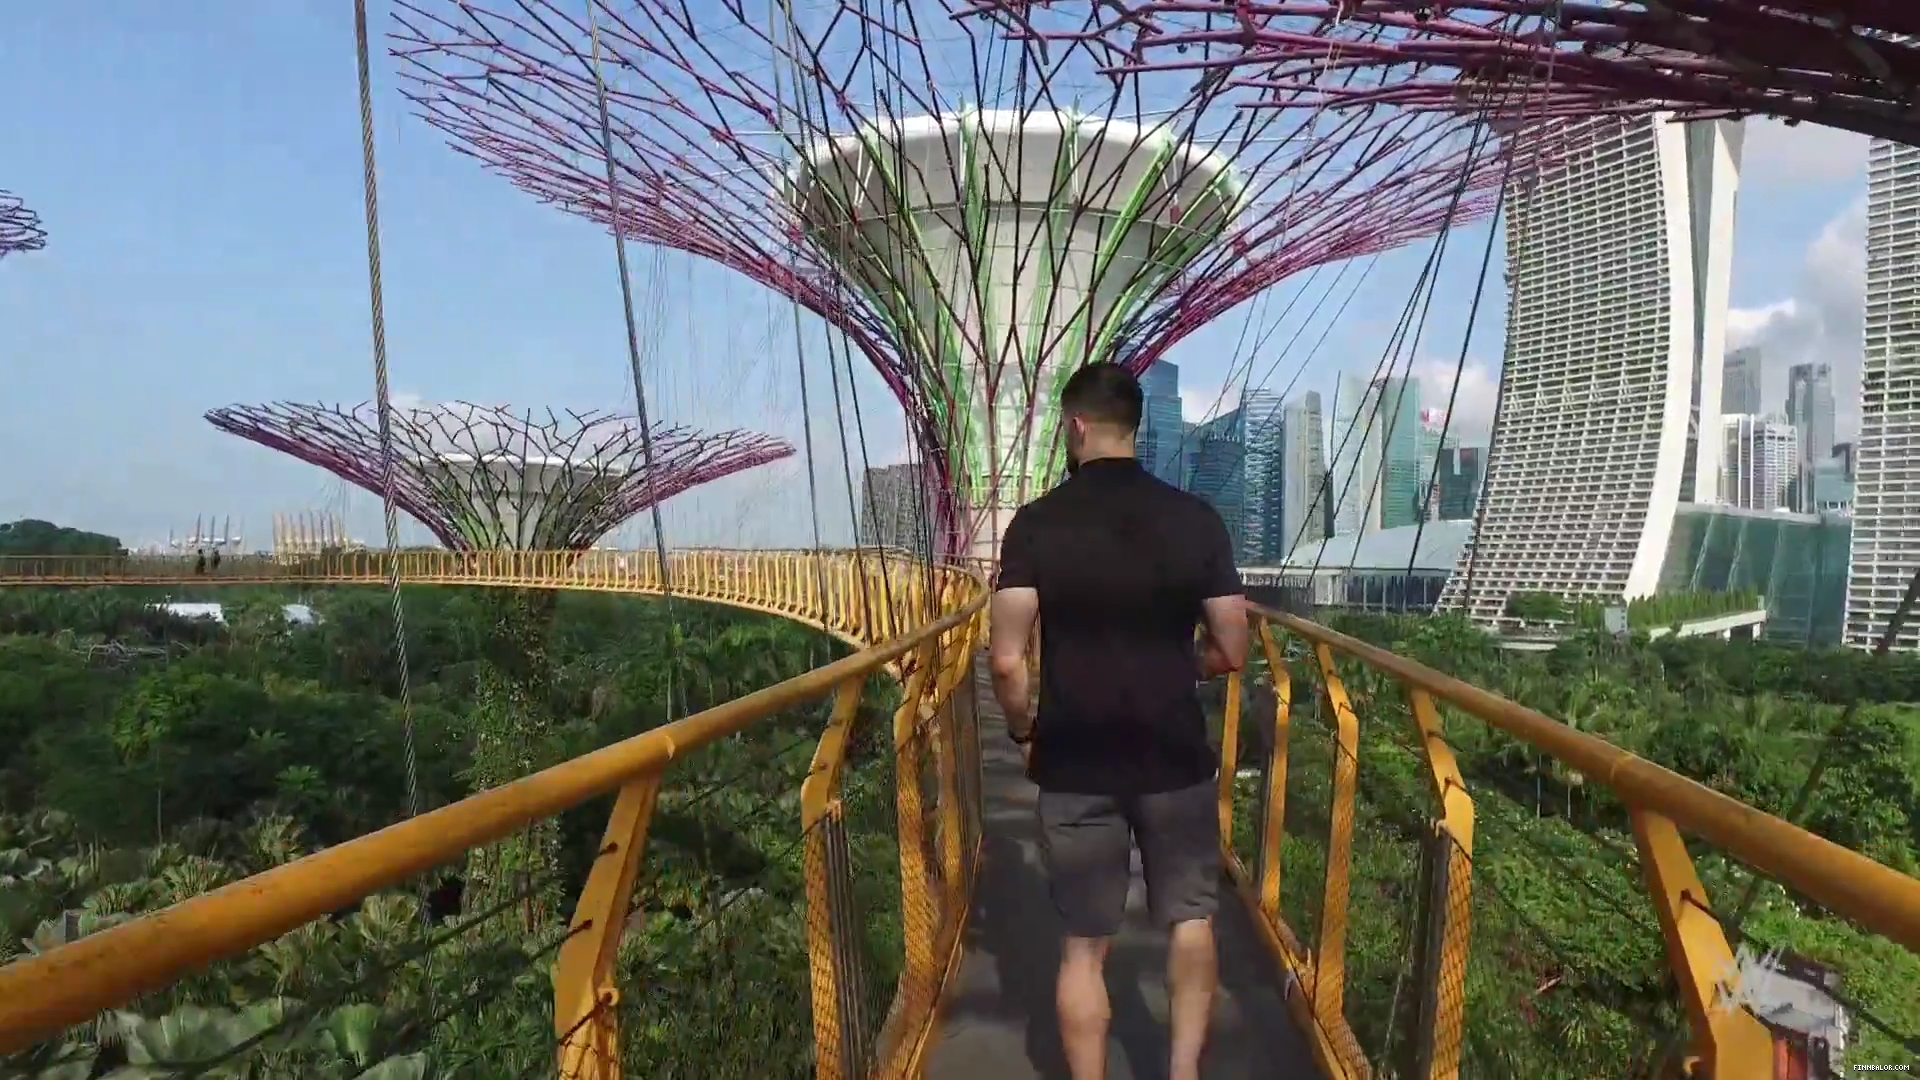 Finn_Balor_feels_like_he_is_in__Star_Wars__while_touring_Singapore_s_Supertree__mp40007.jpg